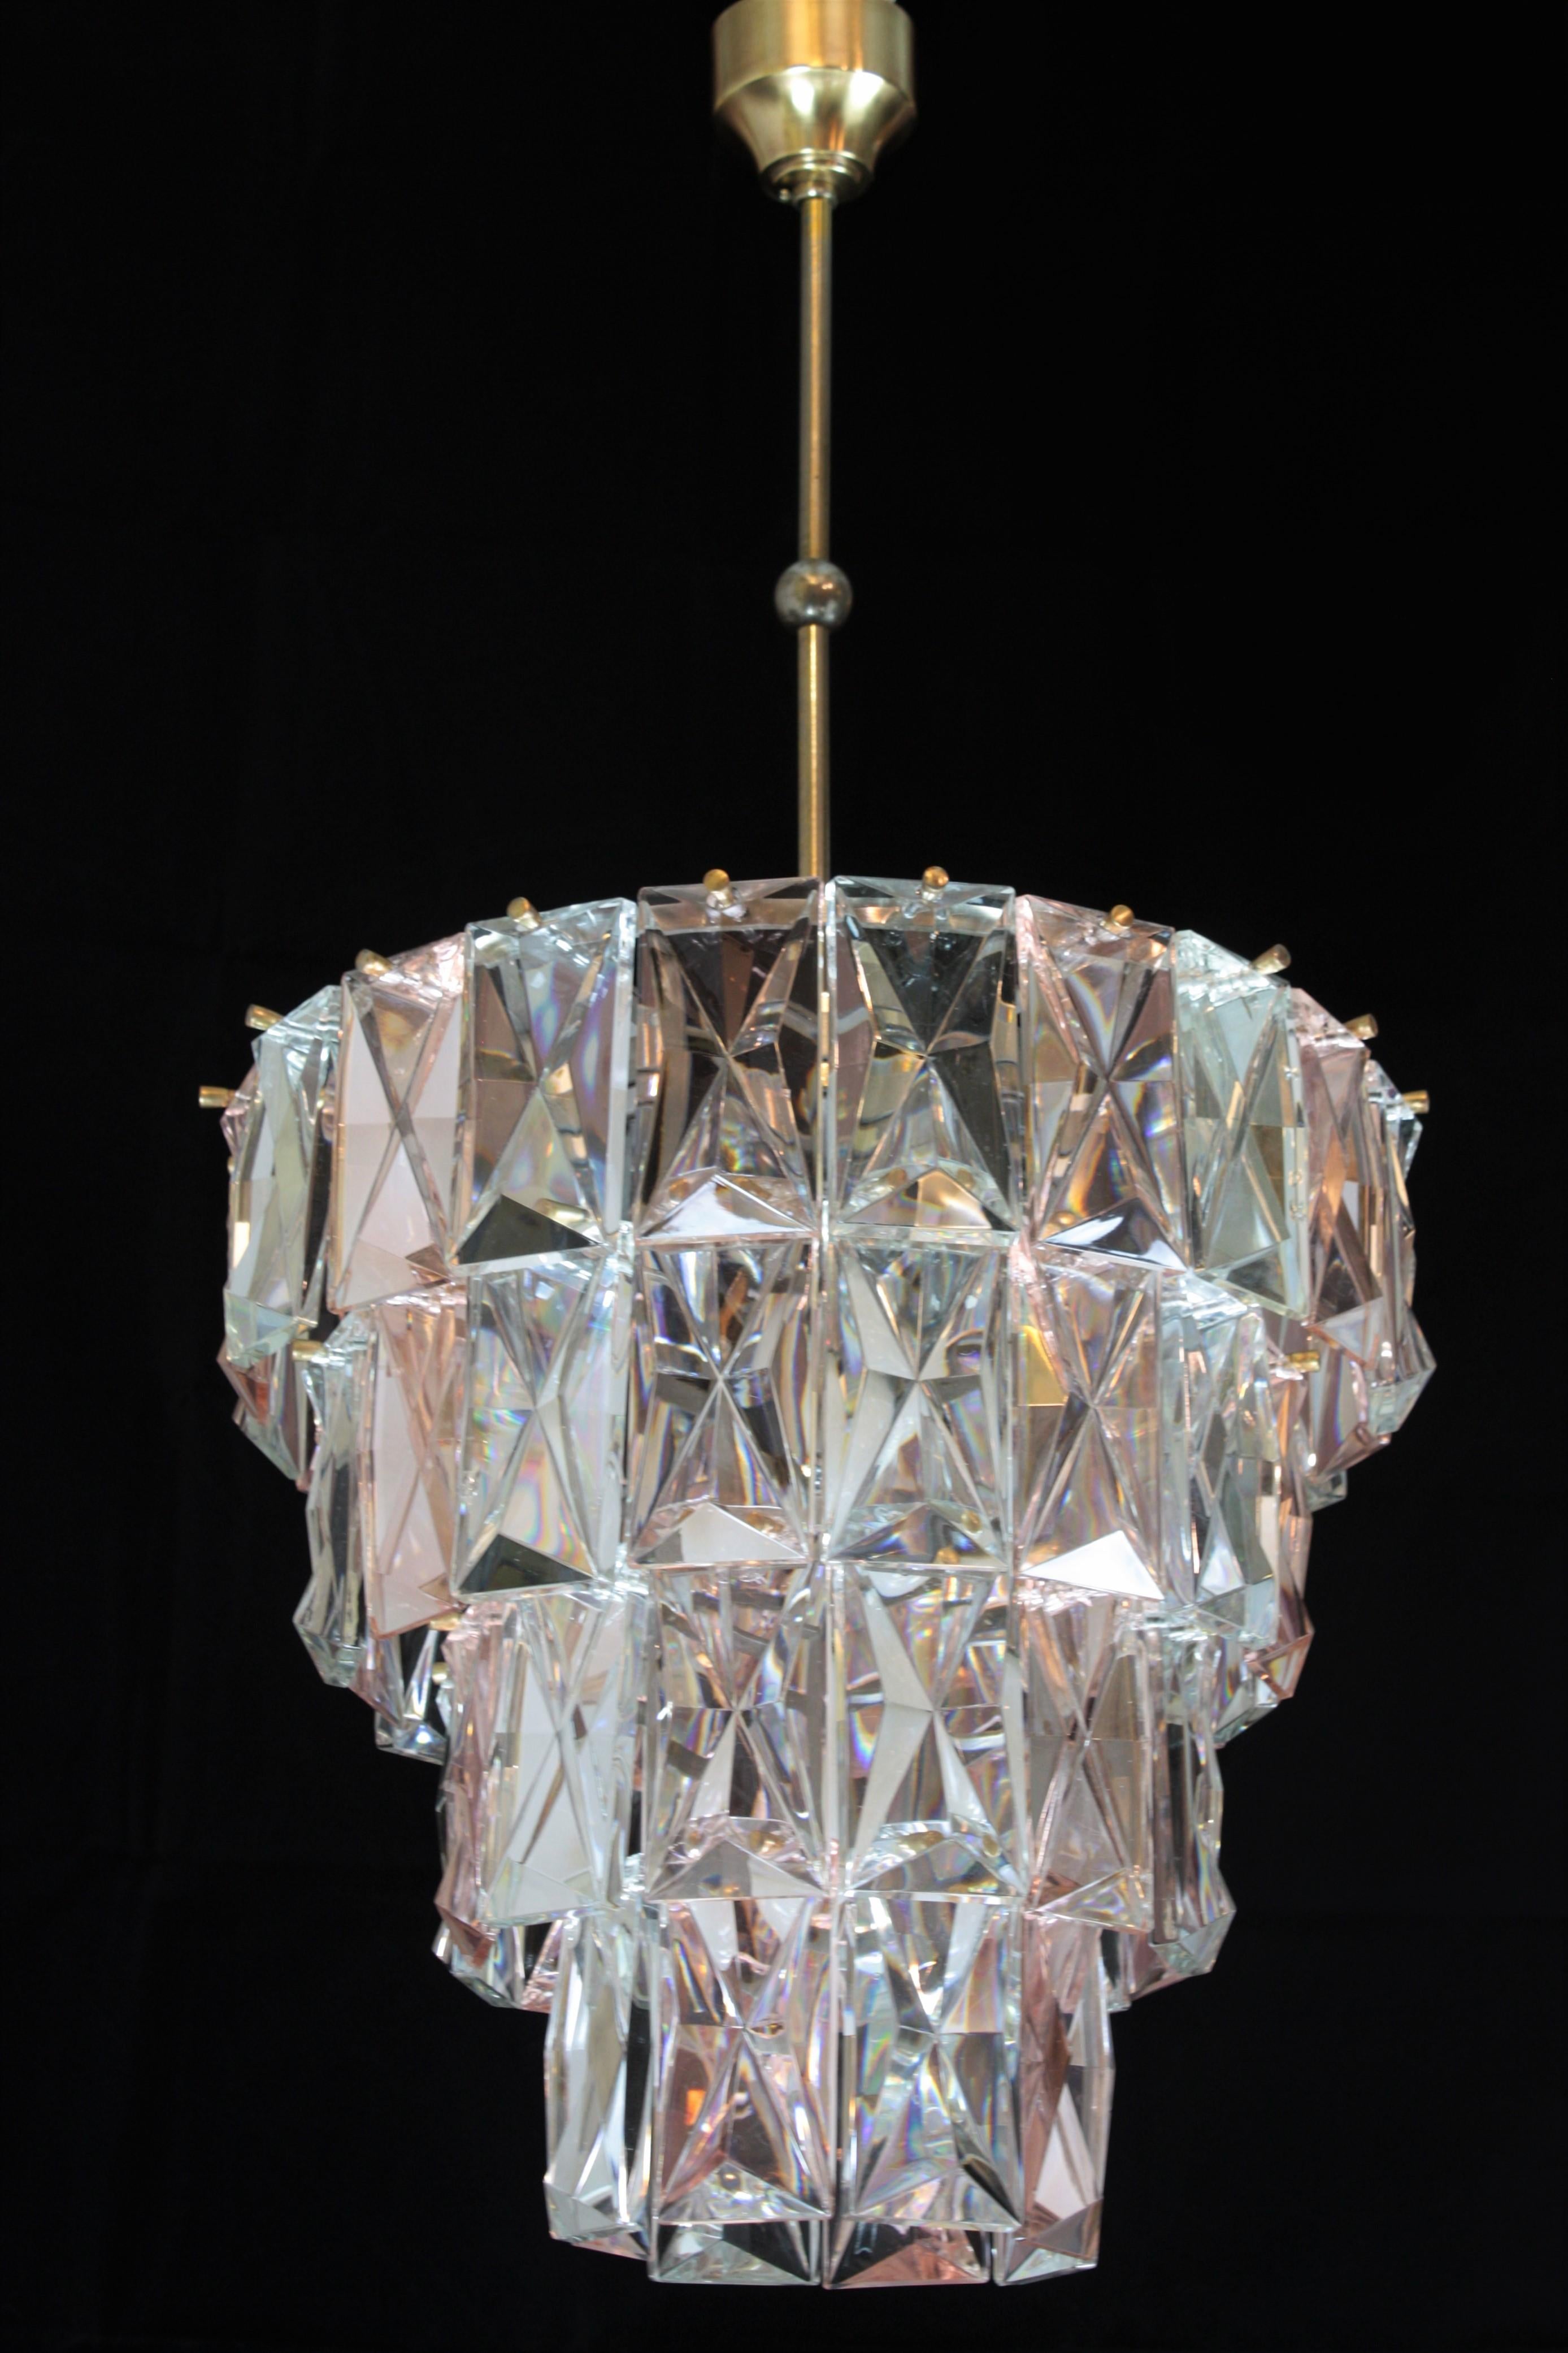 Midcentury Kinkeldey Chandelier in Pink and Clear Faceted Crystal, 1960s For Sale 3